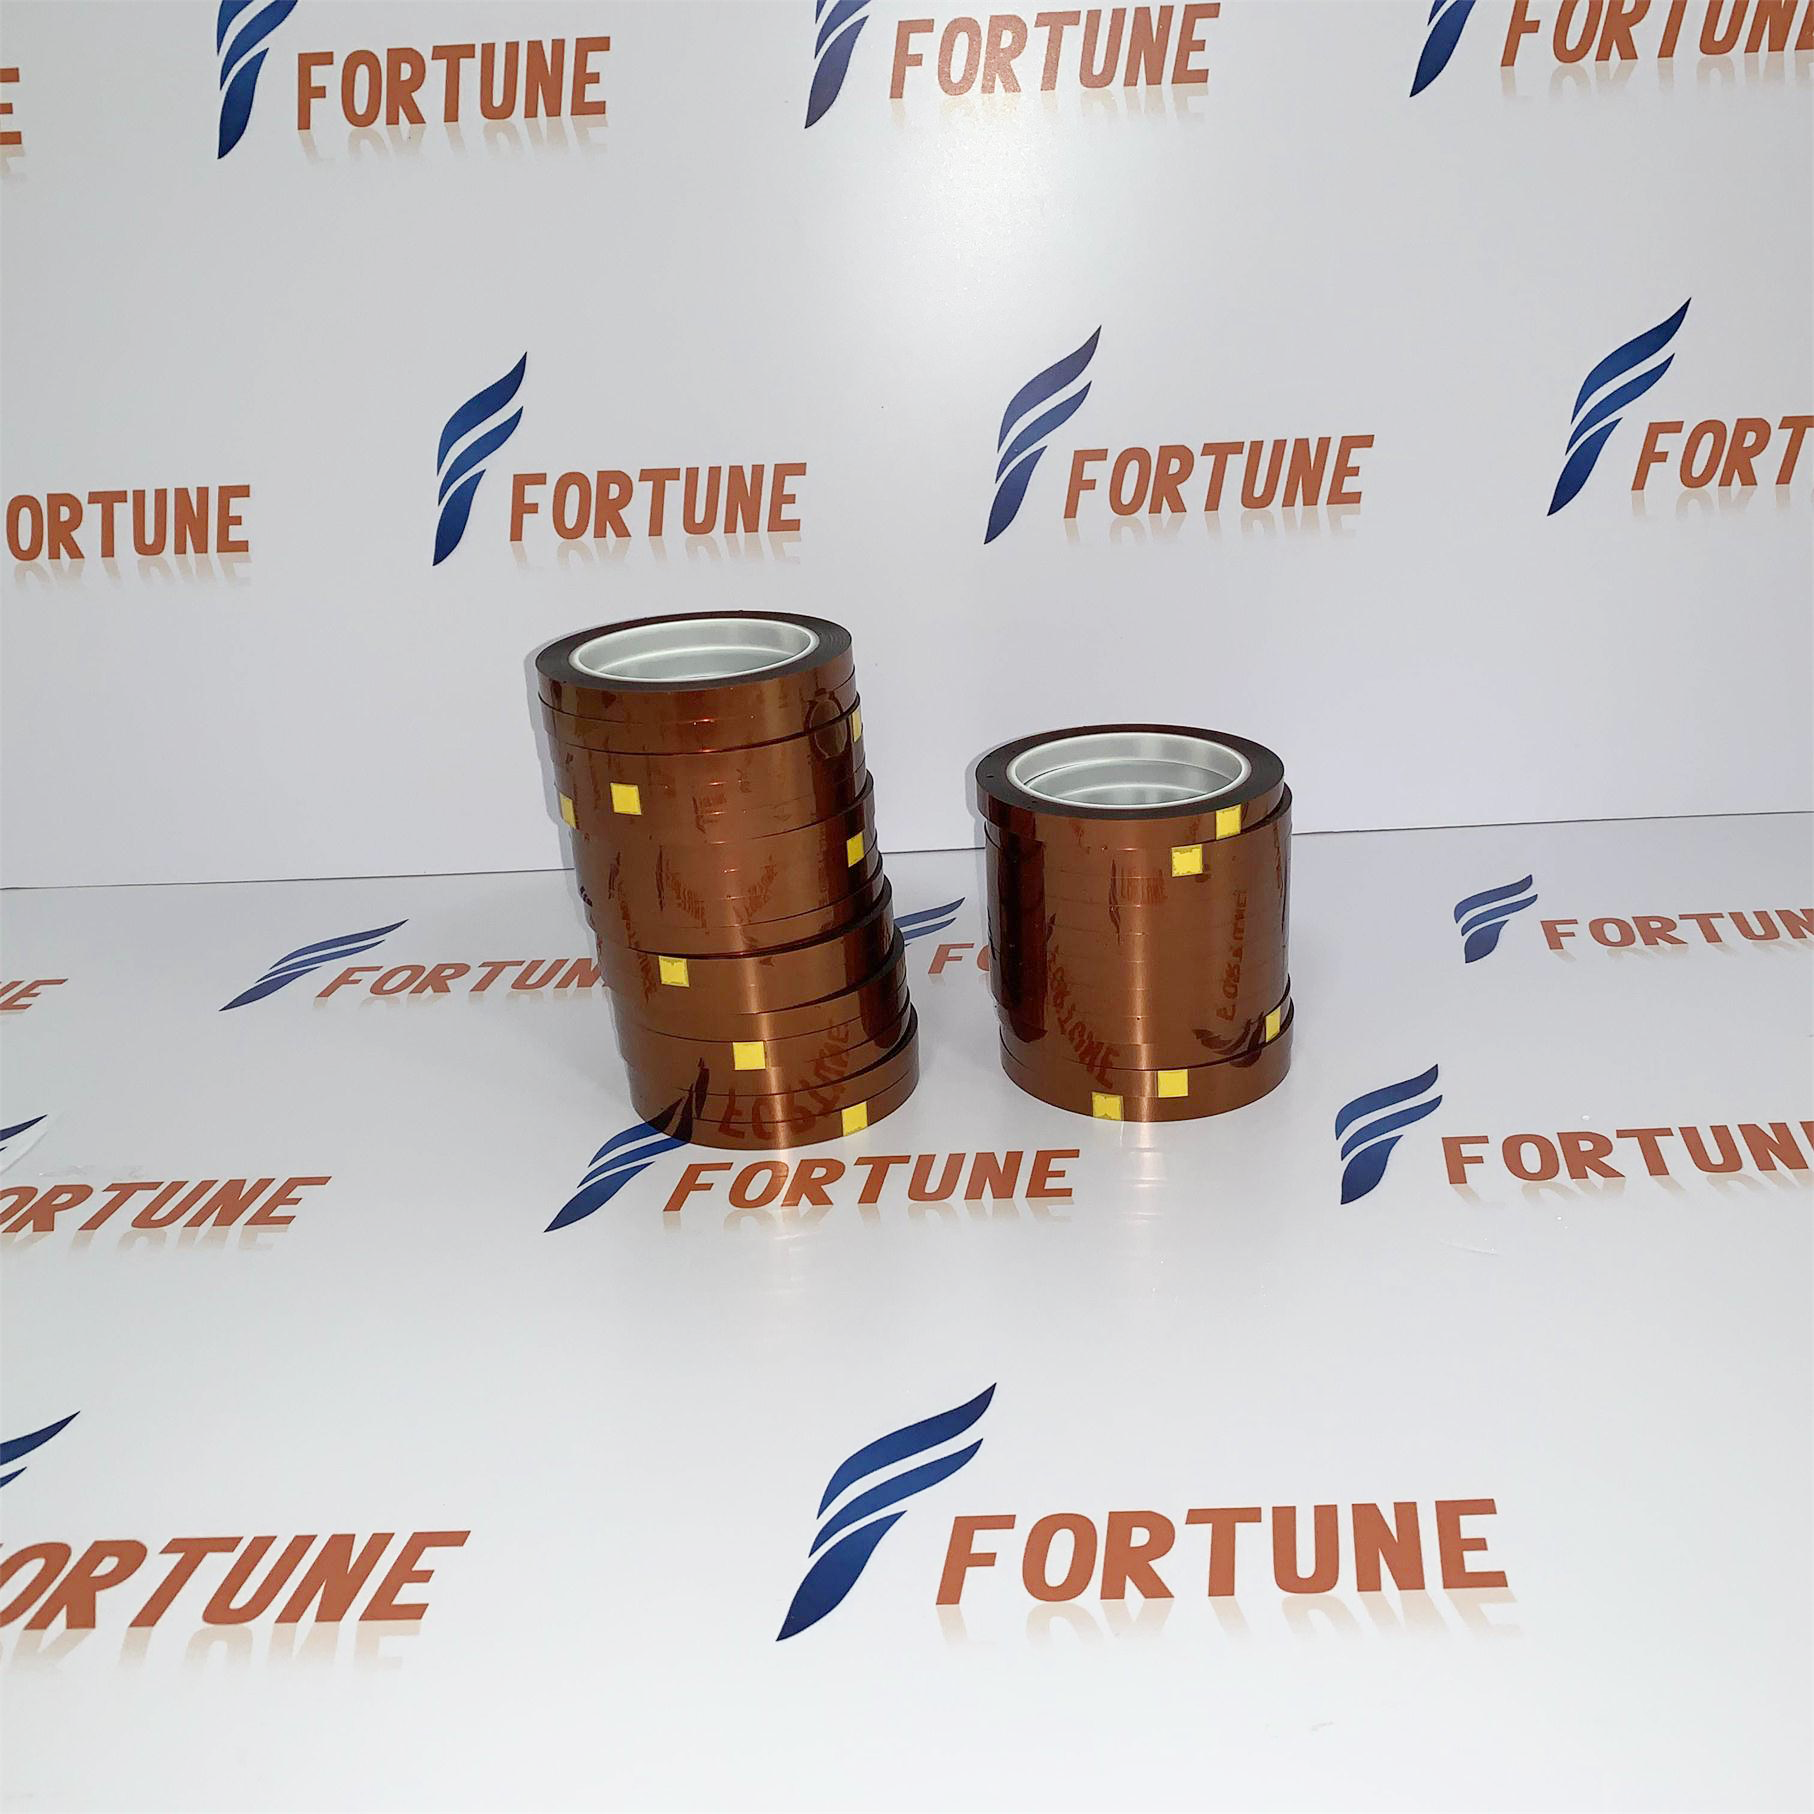 FEP FN Polyimide Film, High Temperature Wires